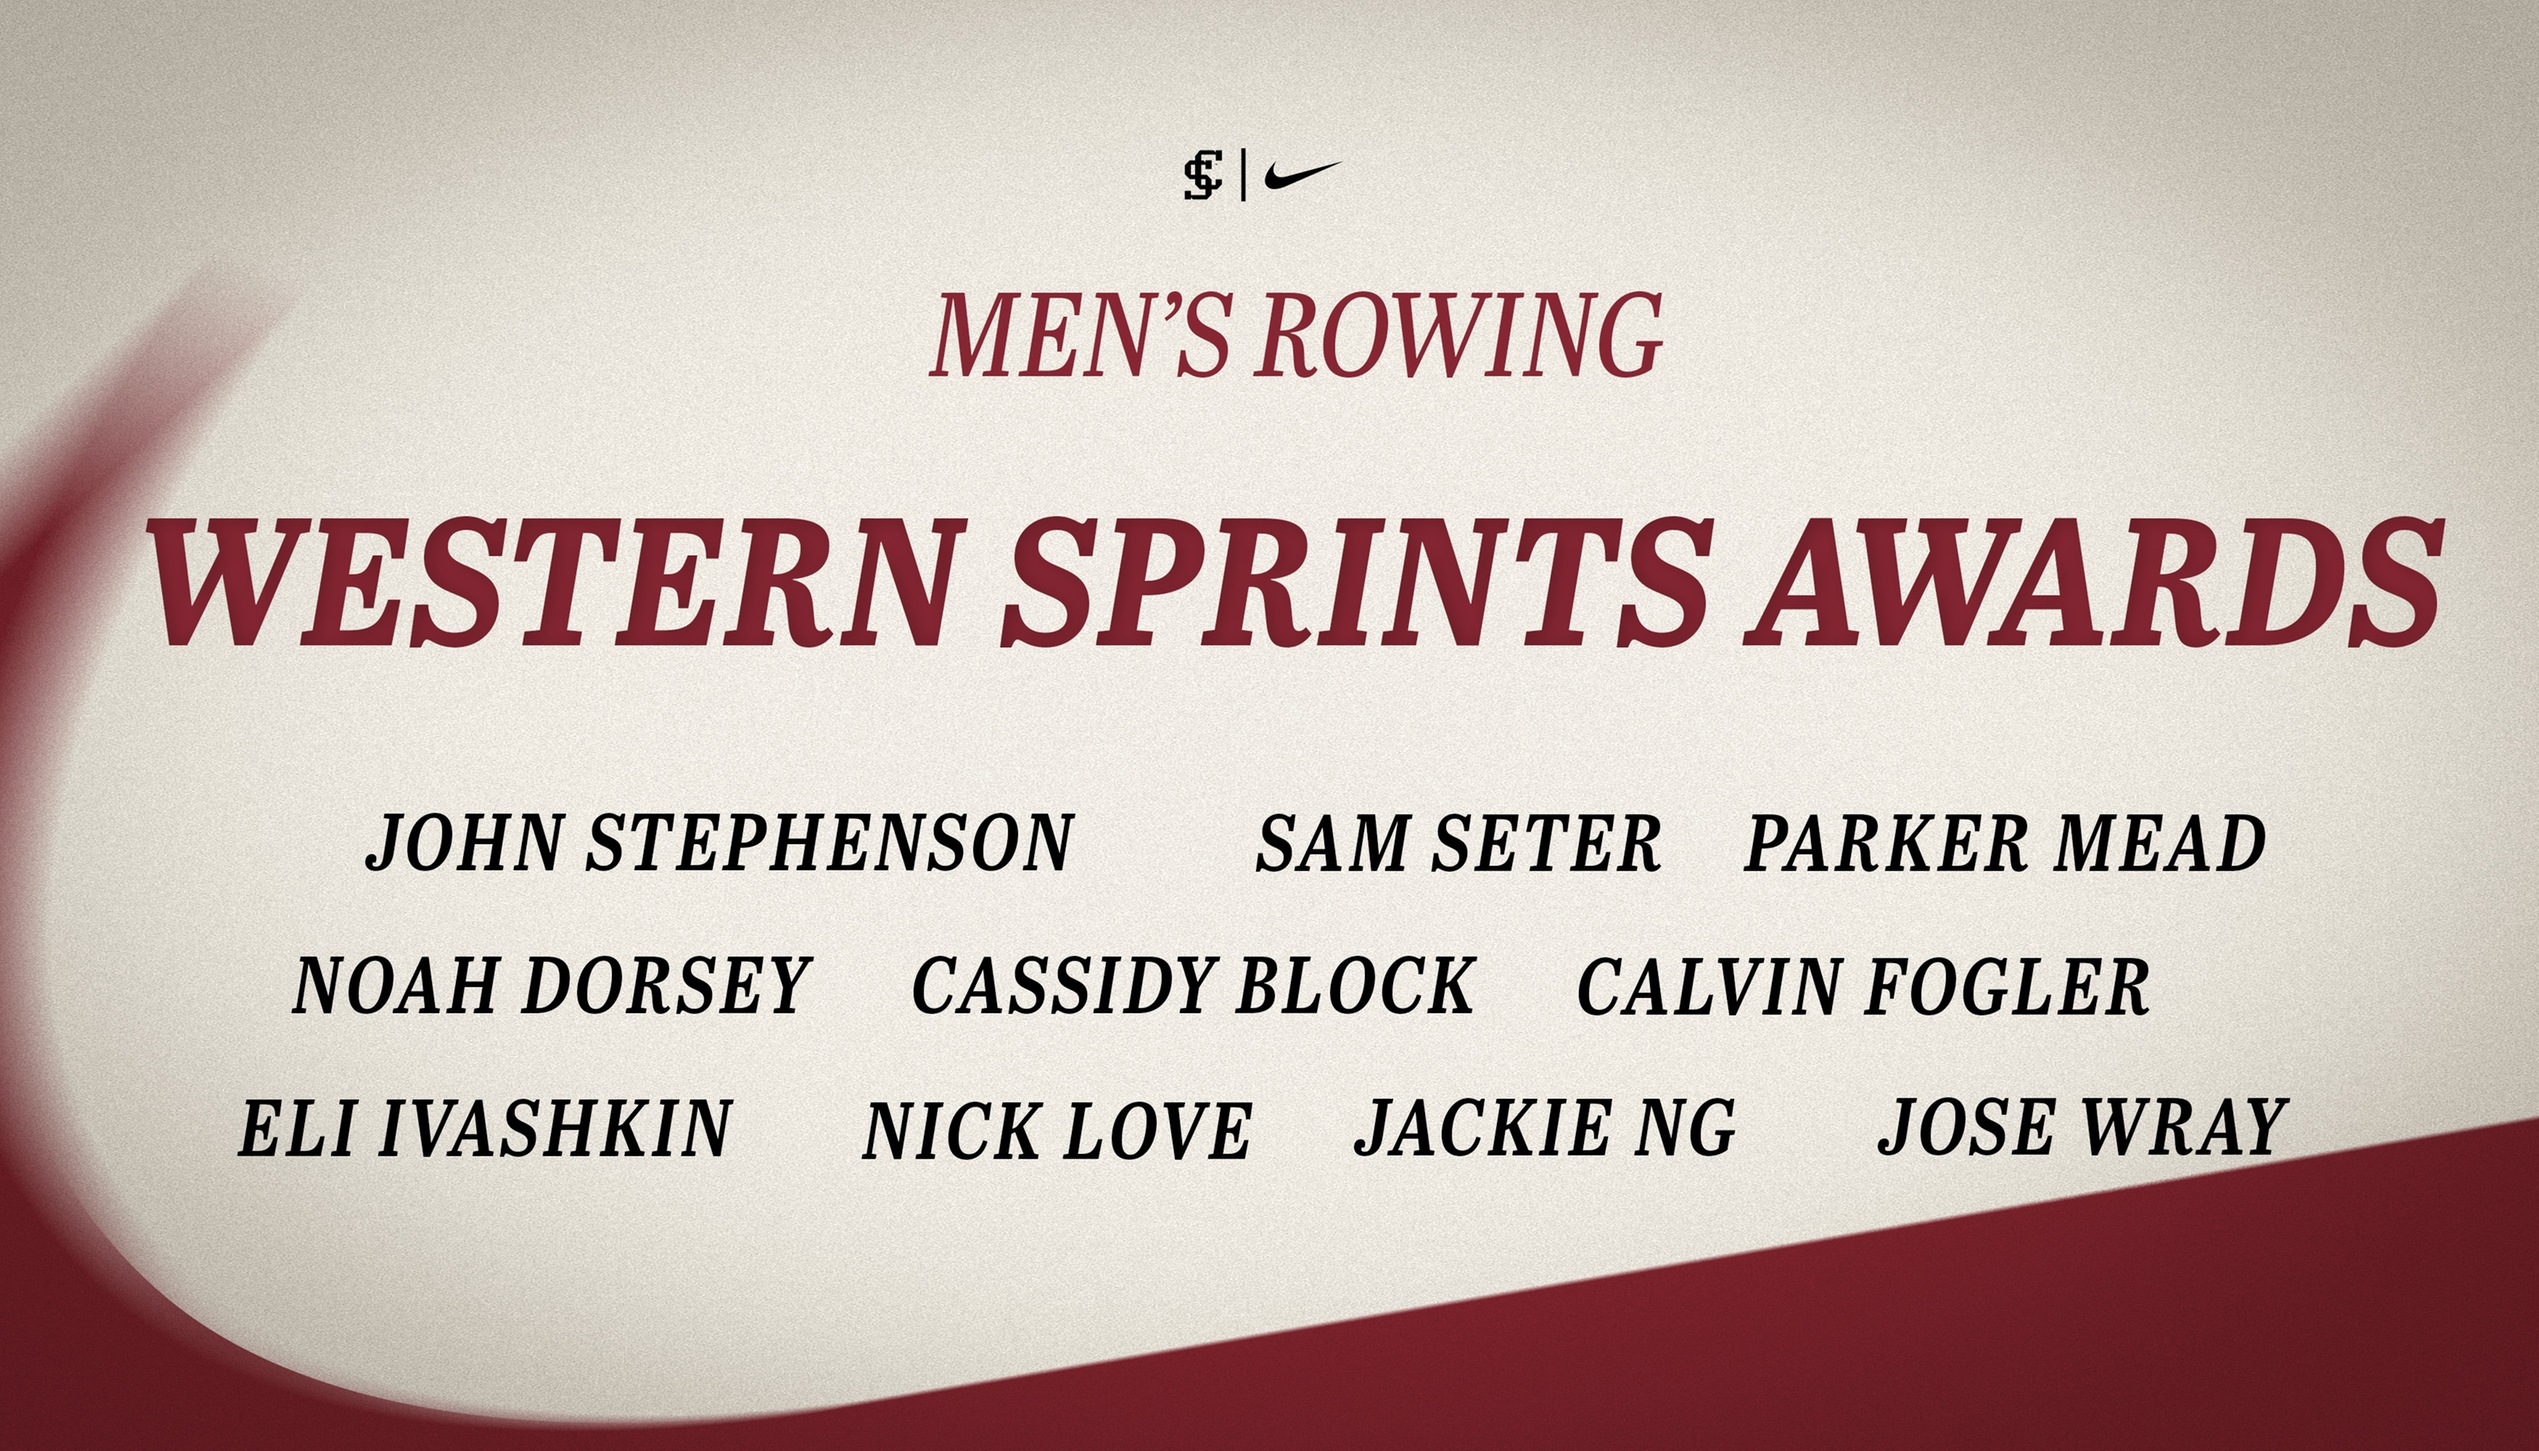 Men's Rowing Has 10 Honored With Western Sprints Awards